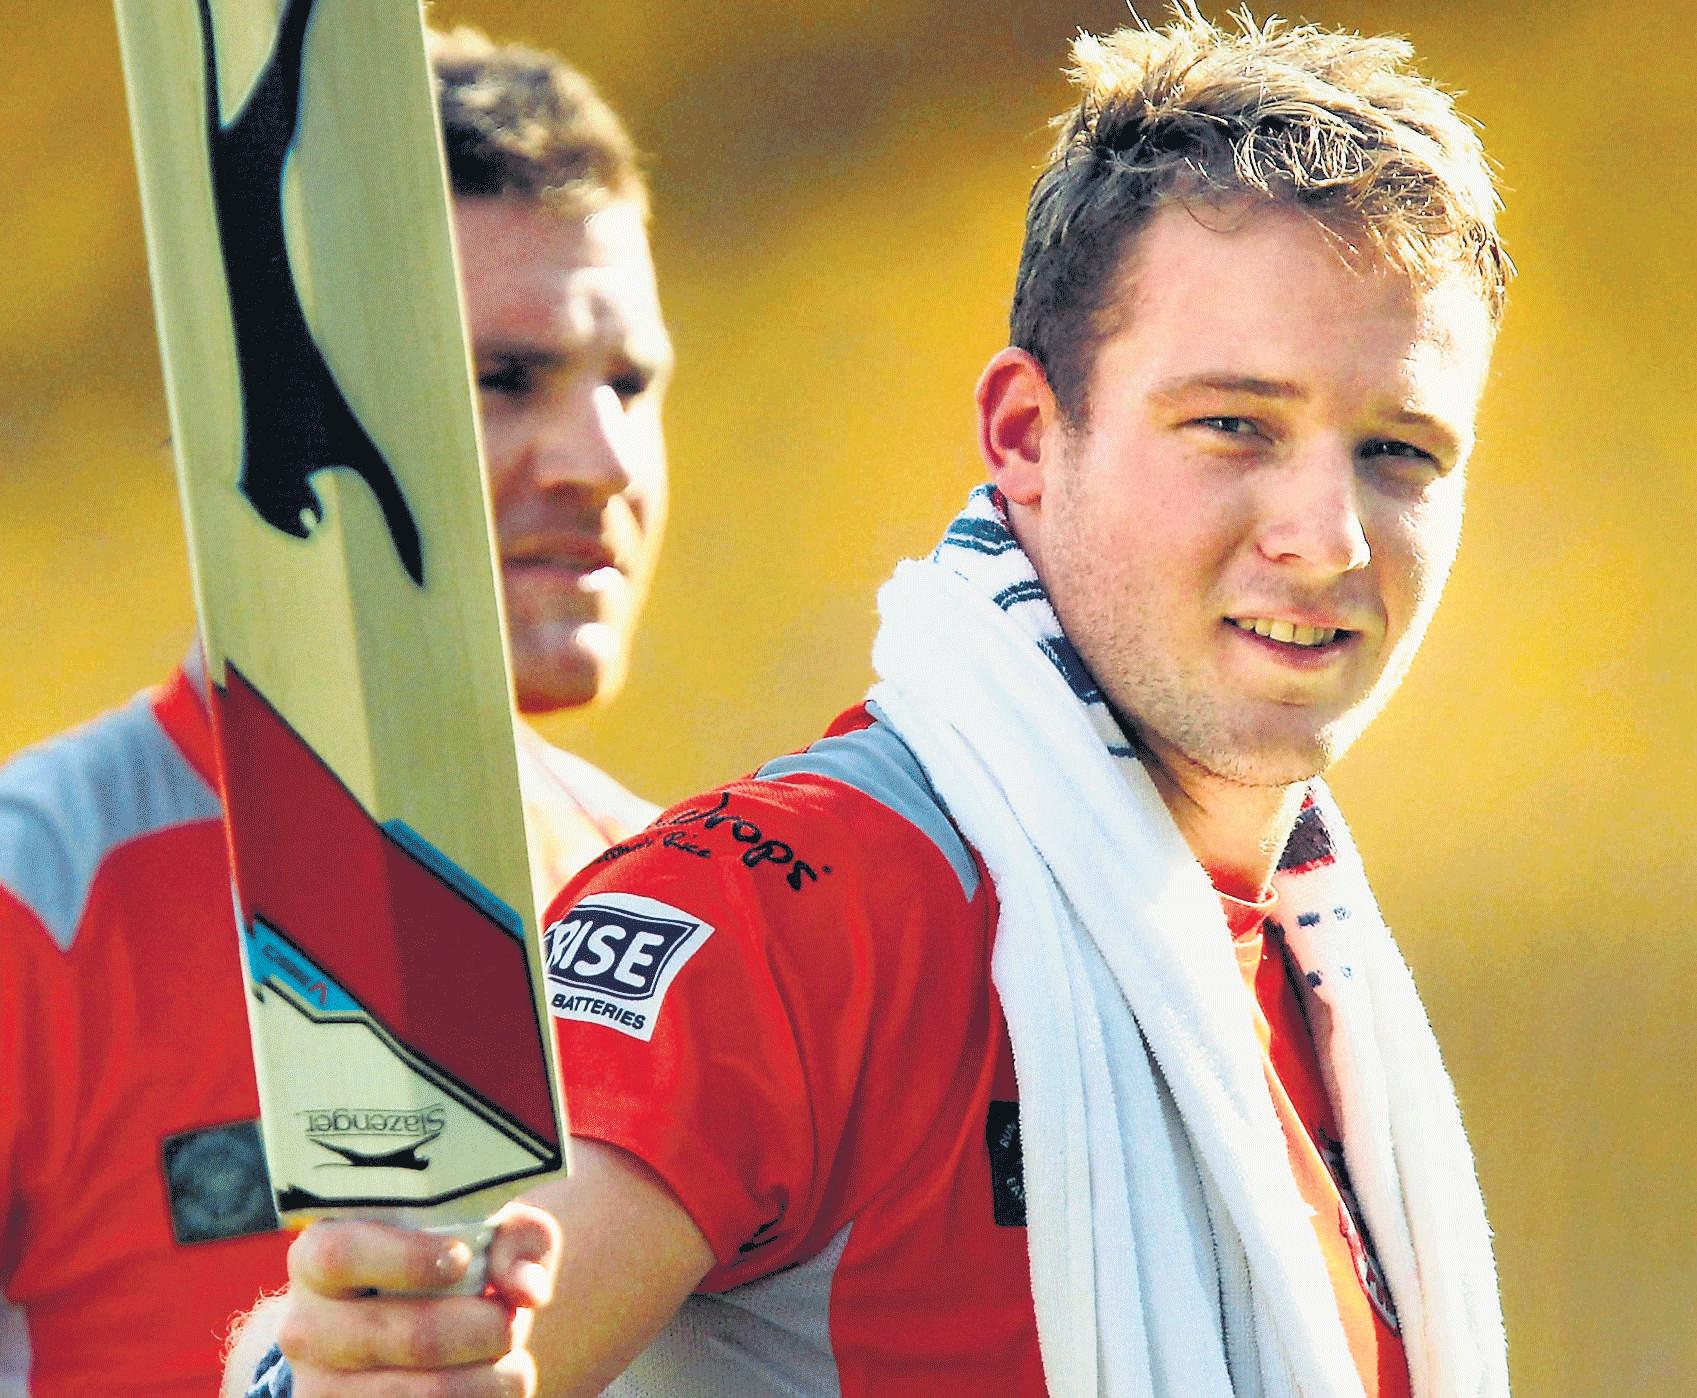 Swift Rise Up The Ranks: Even though he enjoys T20 cricket, David Miller says he is keen to represent South Africa in Test cricket. PTI.